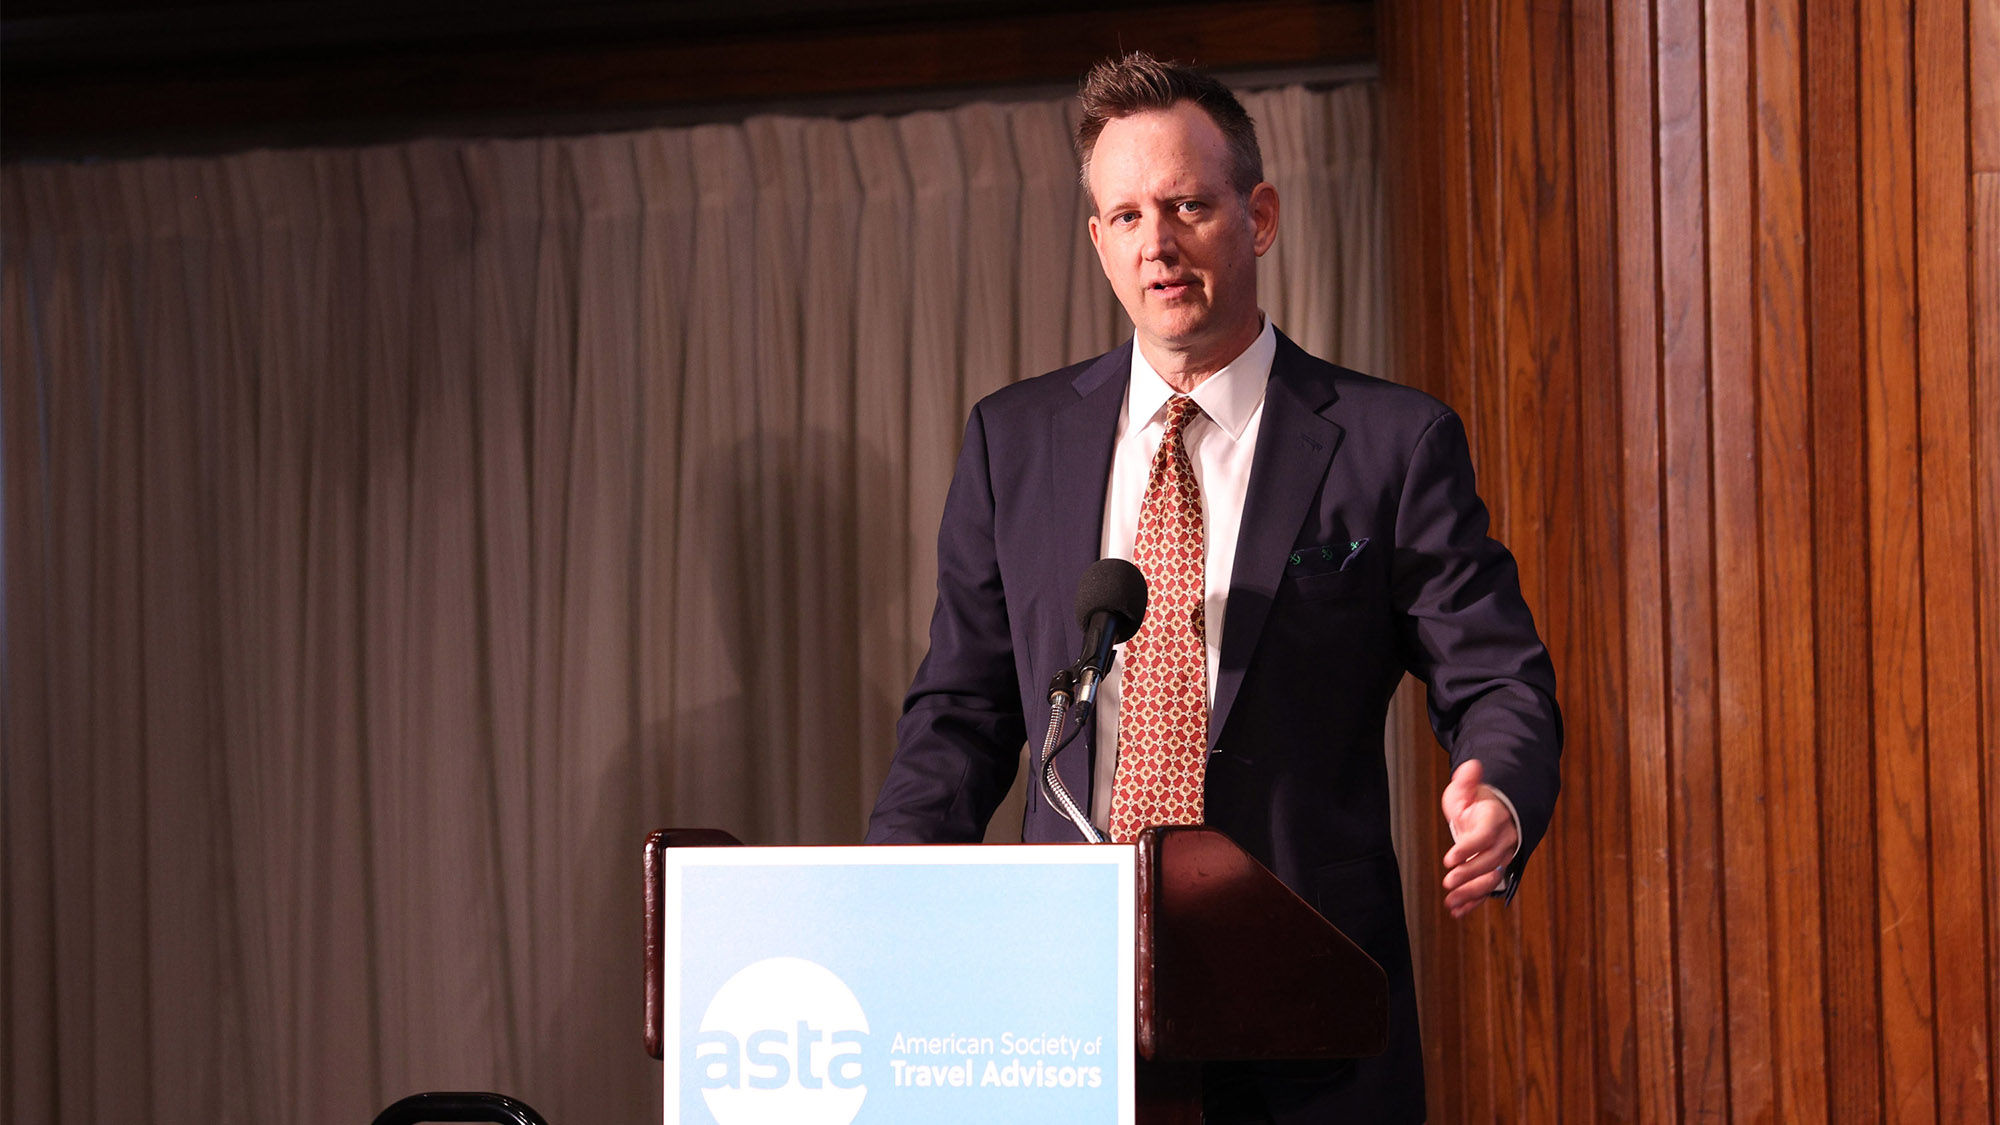 Norwegian Cruise Line senior vice president of North American sales John Chernesky at ASTA’s Travel Industry Forecast at the National Press Club in Washington, D.C.